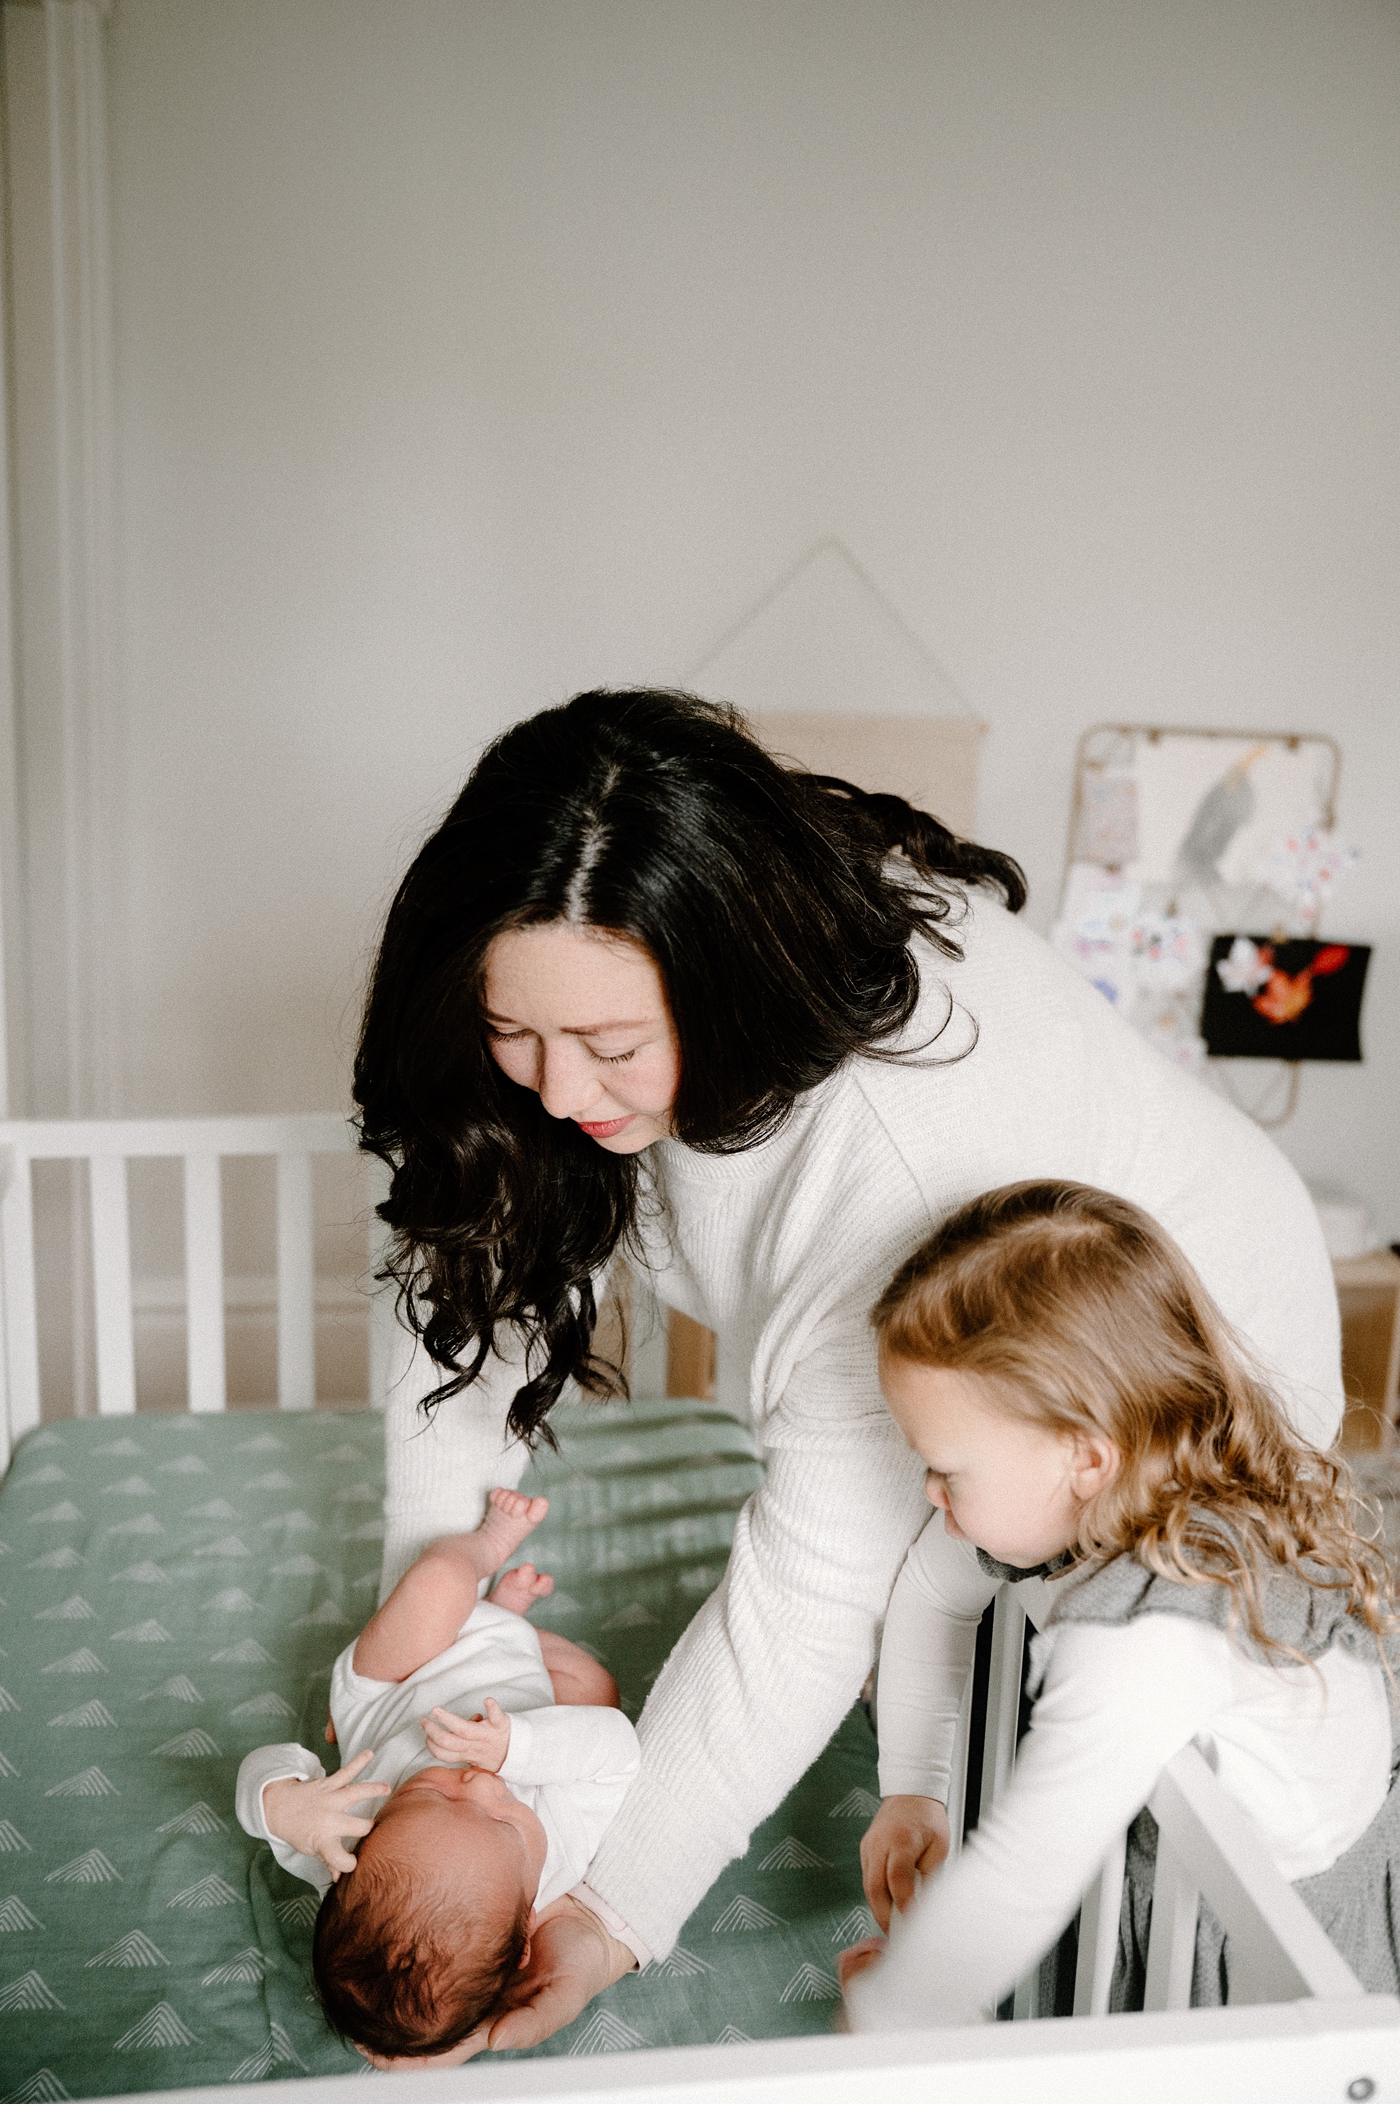 Mom lays baby in crib with big sister next to her during lifestyle in home newborn session. Photo by Meg Newton Photography.